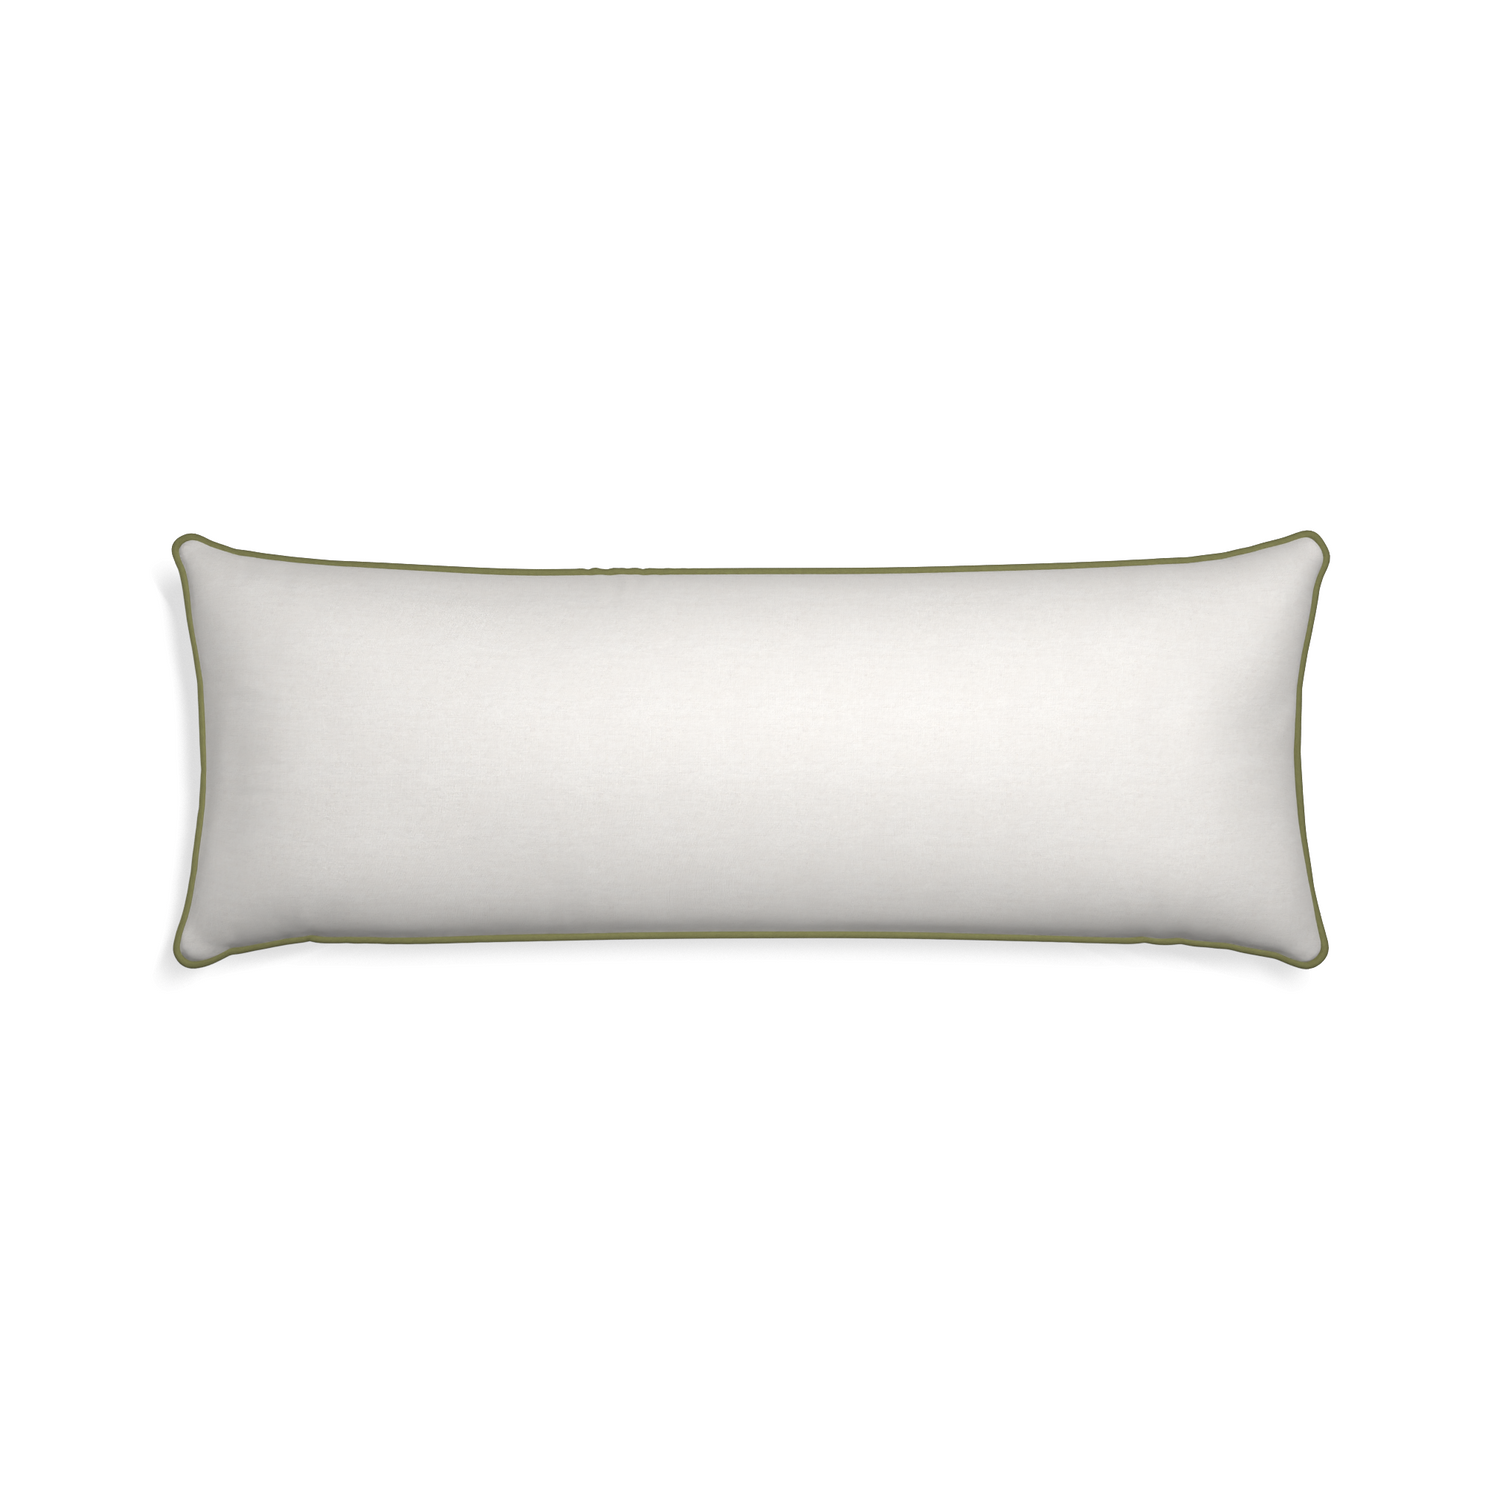 Xl-lumbar flour custom pillow with moss piping on white background